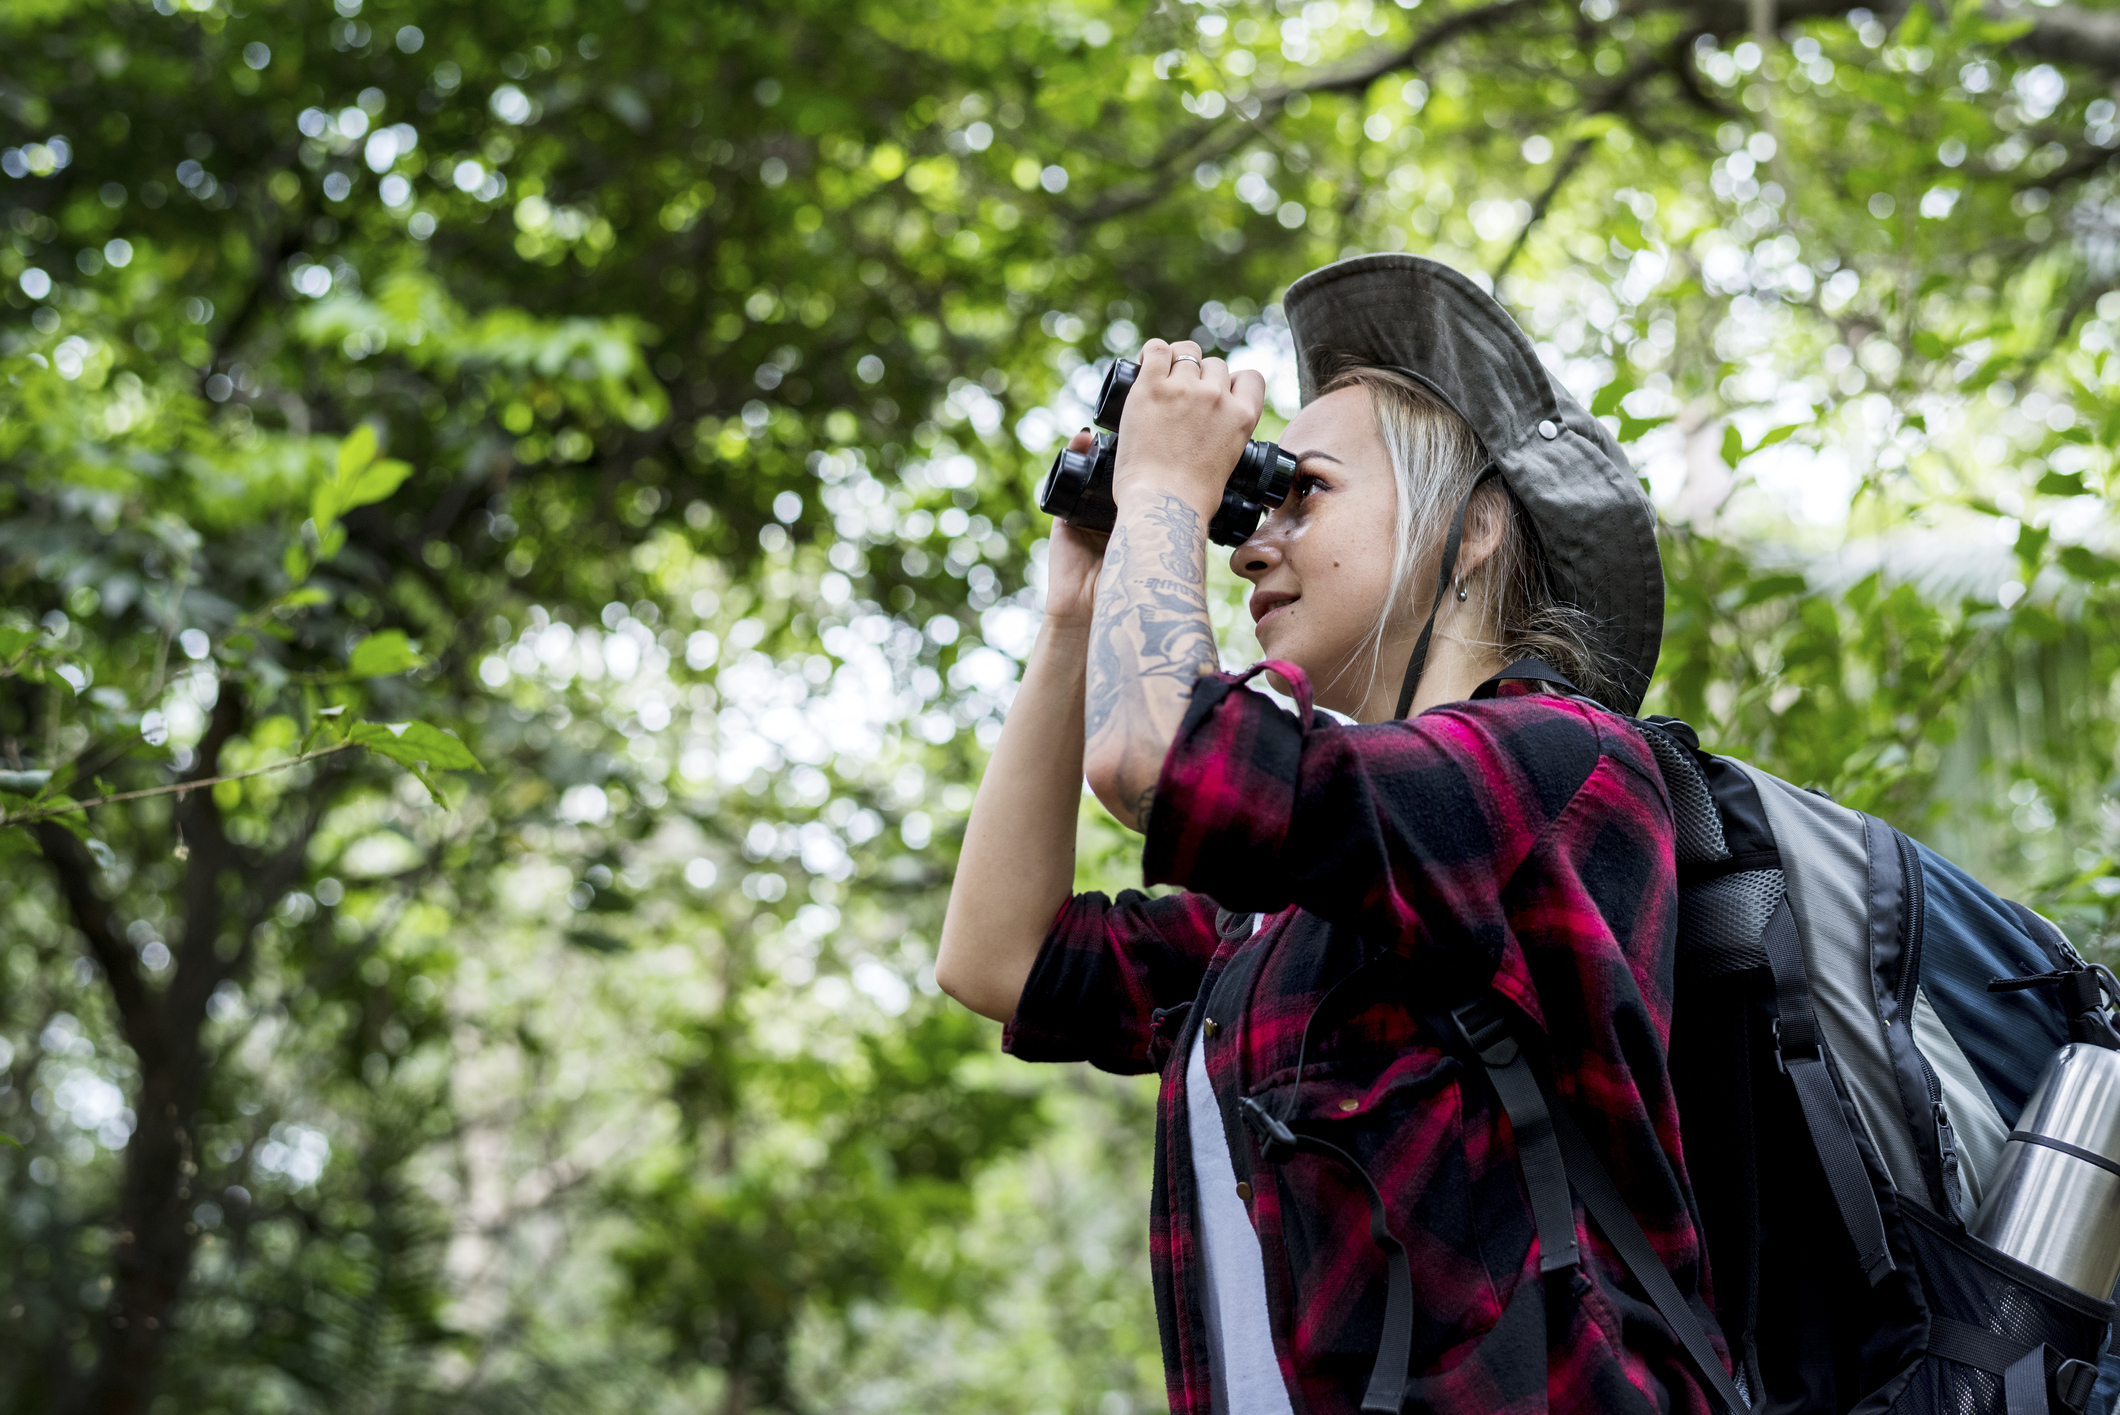 A female birdwatcher under a canopy of trees.